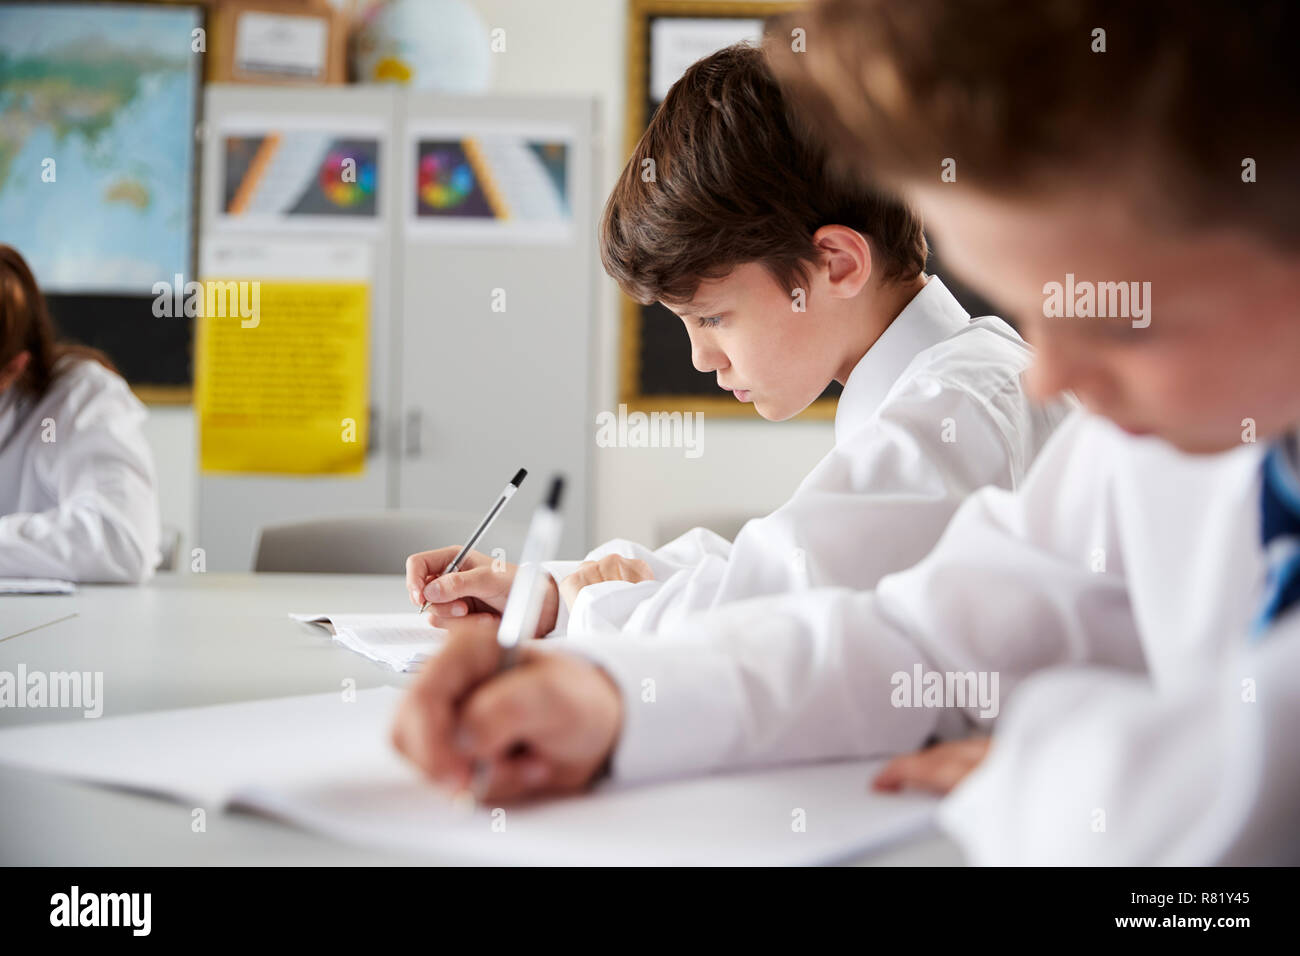 High School Students Wearing Uniform Sitting And Working Around Table In Lesson Stock Photo